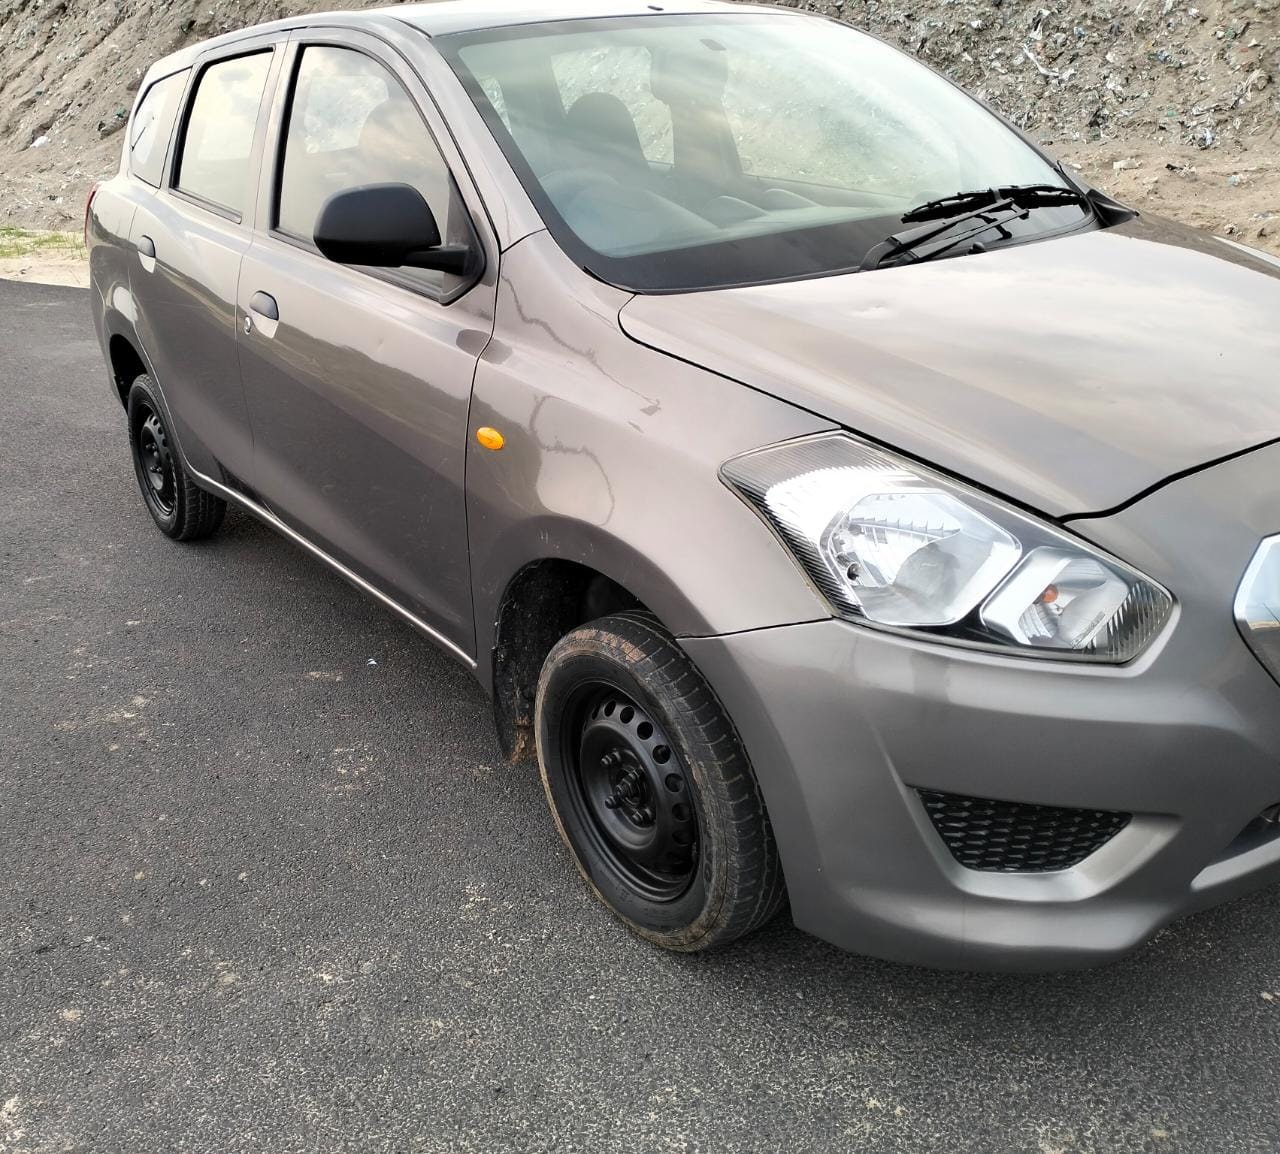 4689-for-sale-Datsun-Go-Plus-Petrol-First-Owner-2018-PY-registered-rs-298000